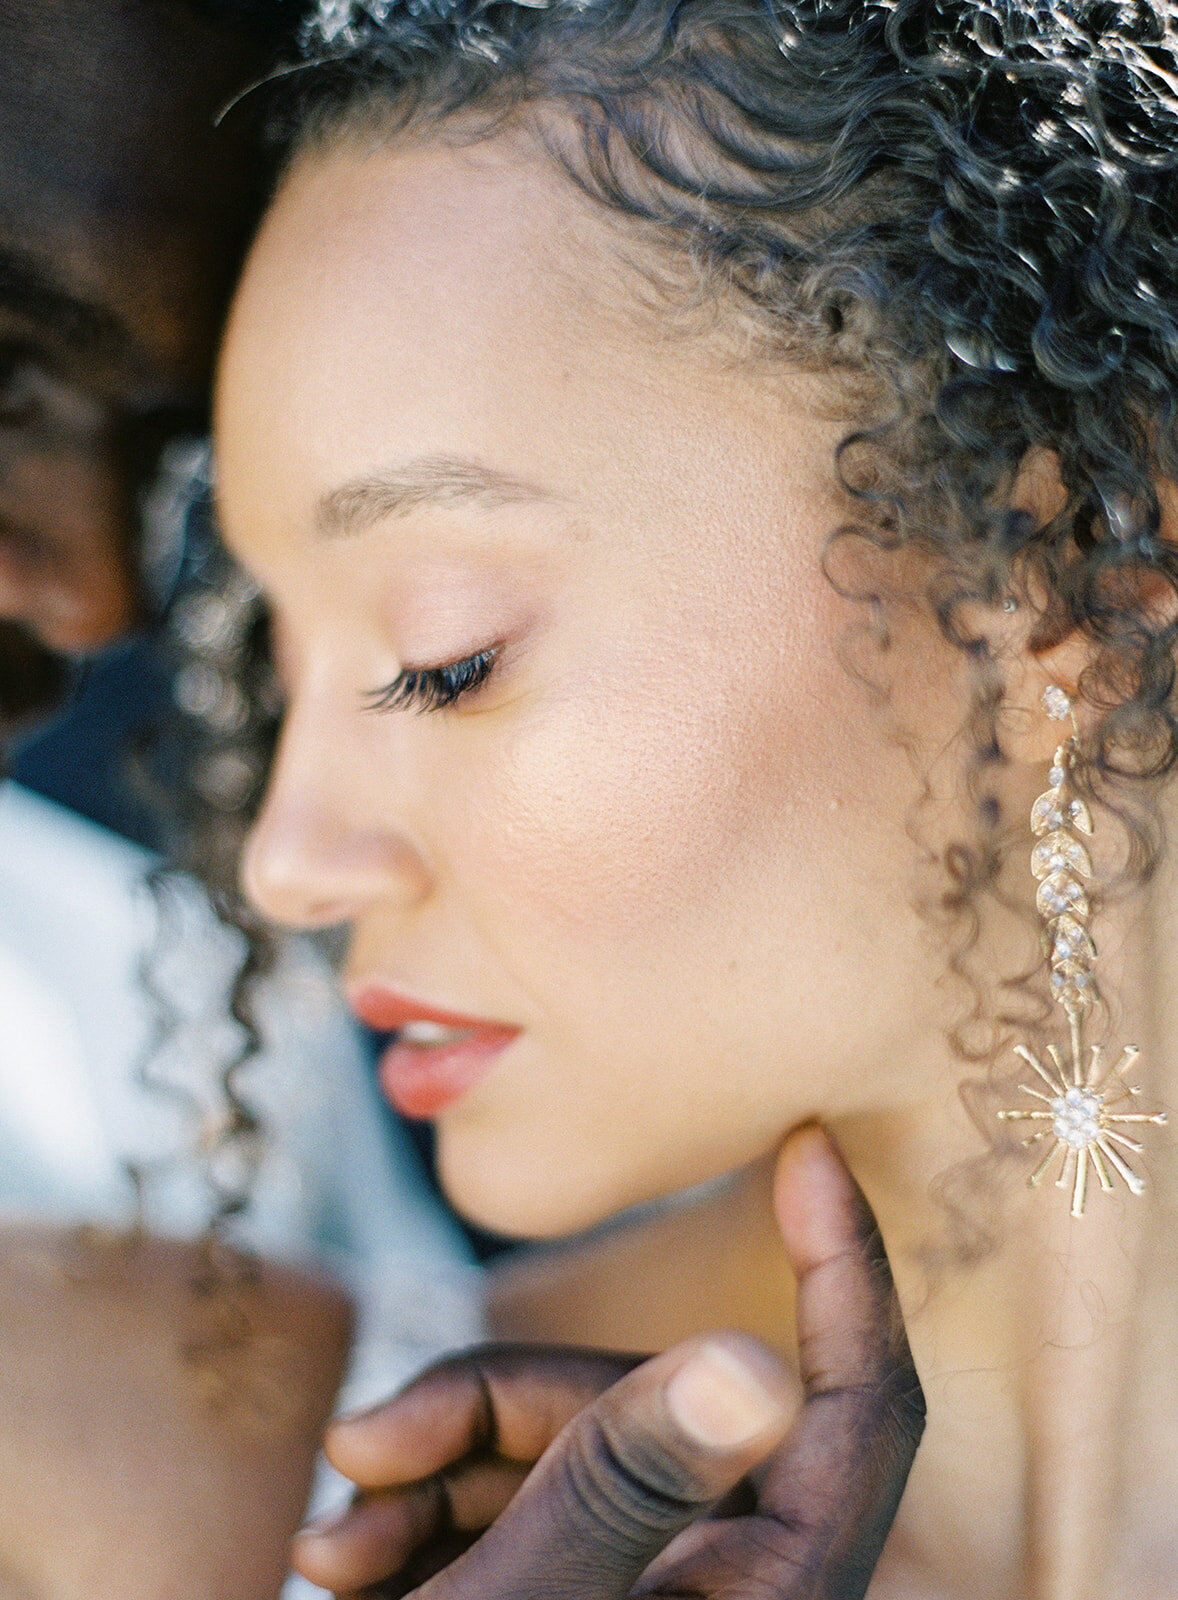 Close up of bride's face. She is looking to the side so her full profile is captured.  She has gold sunburst drop earrings. The groom has his forehead against her temple and is just showing his top lip to top of forehead and his fingers that are softly cupping her under her chin. She has bold scarlet lipstick and her hair is down in curls to the side. The light is shining through behind them. Photographed by wedding photographers in Charleston Amy Mulder Photography.